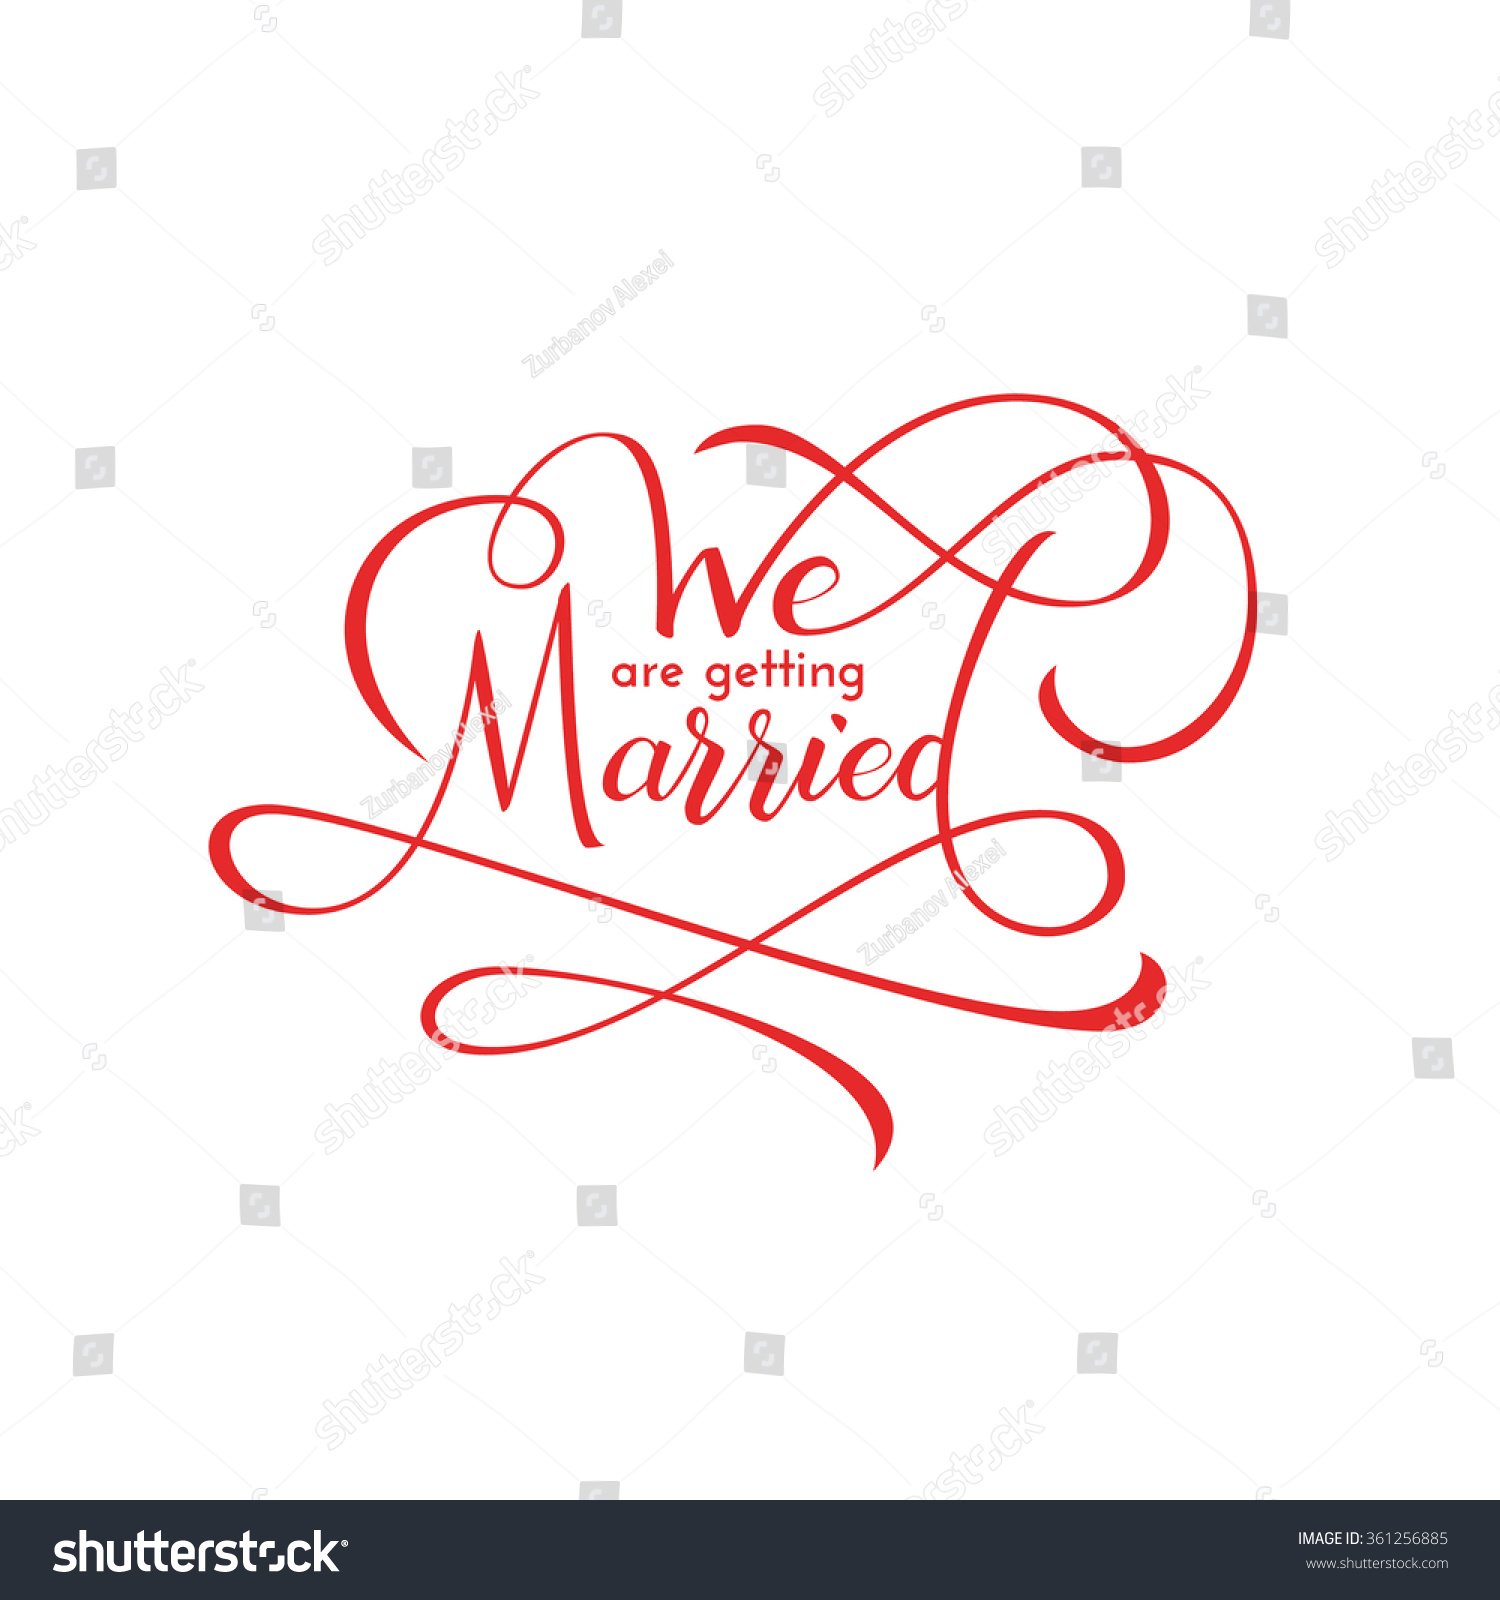 We Getting Married Vector Lettering Background 스톡 벡터 로열티 프리 361256885 Shutterstock